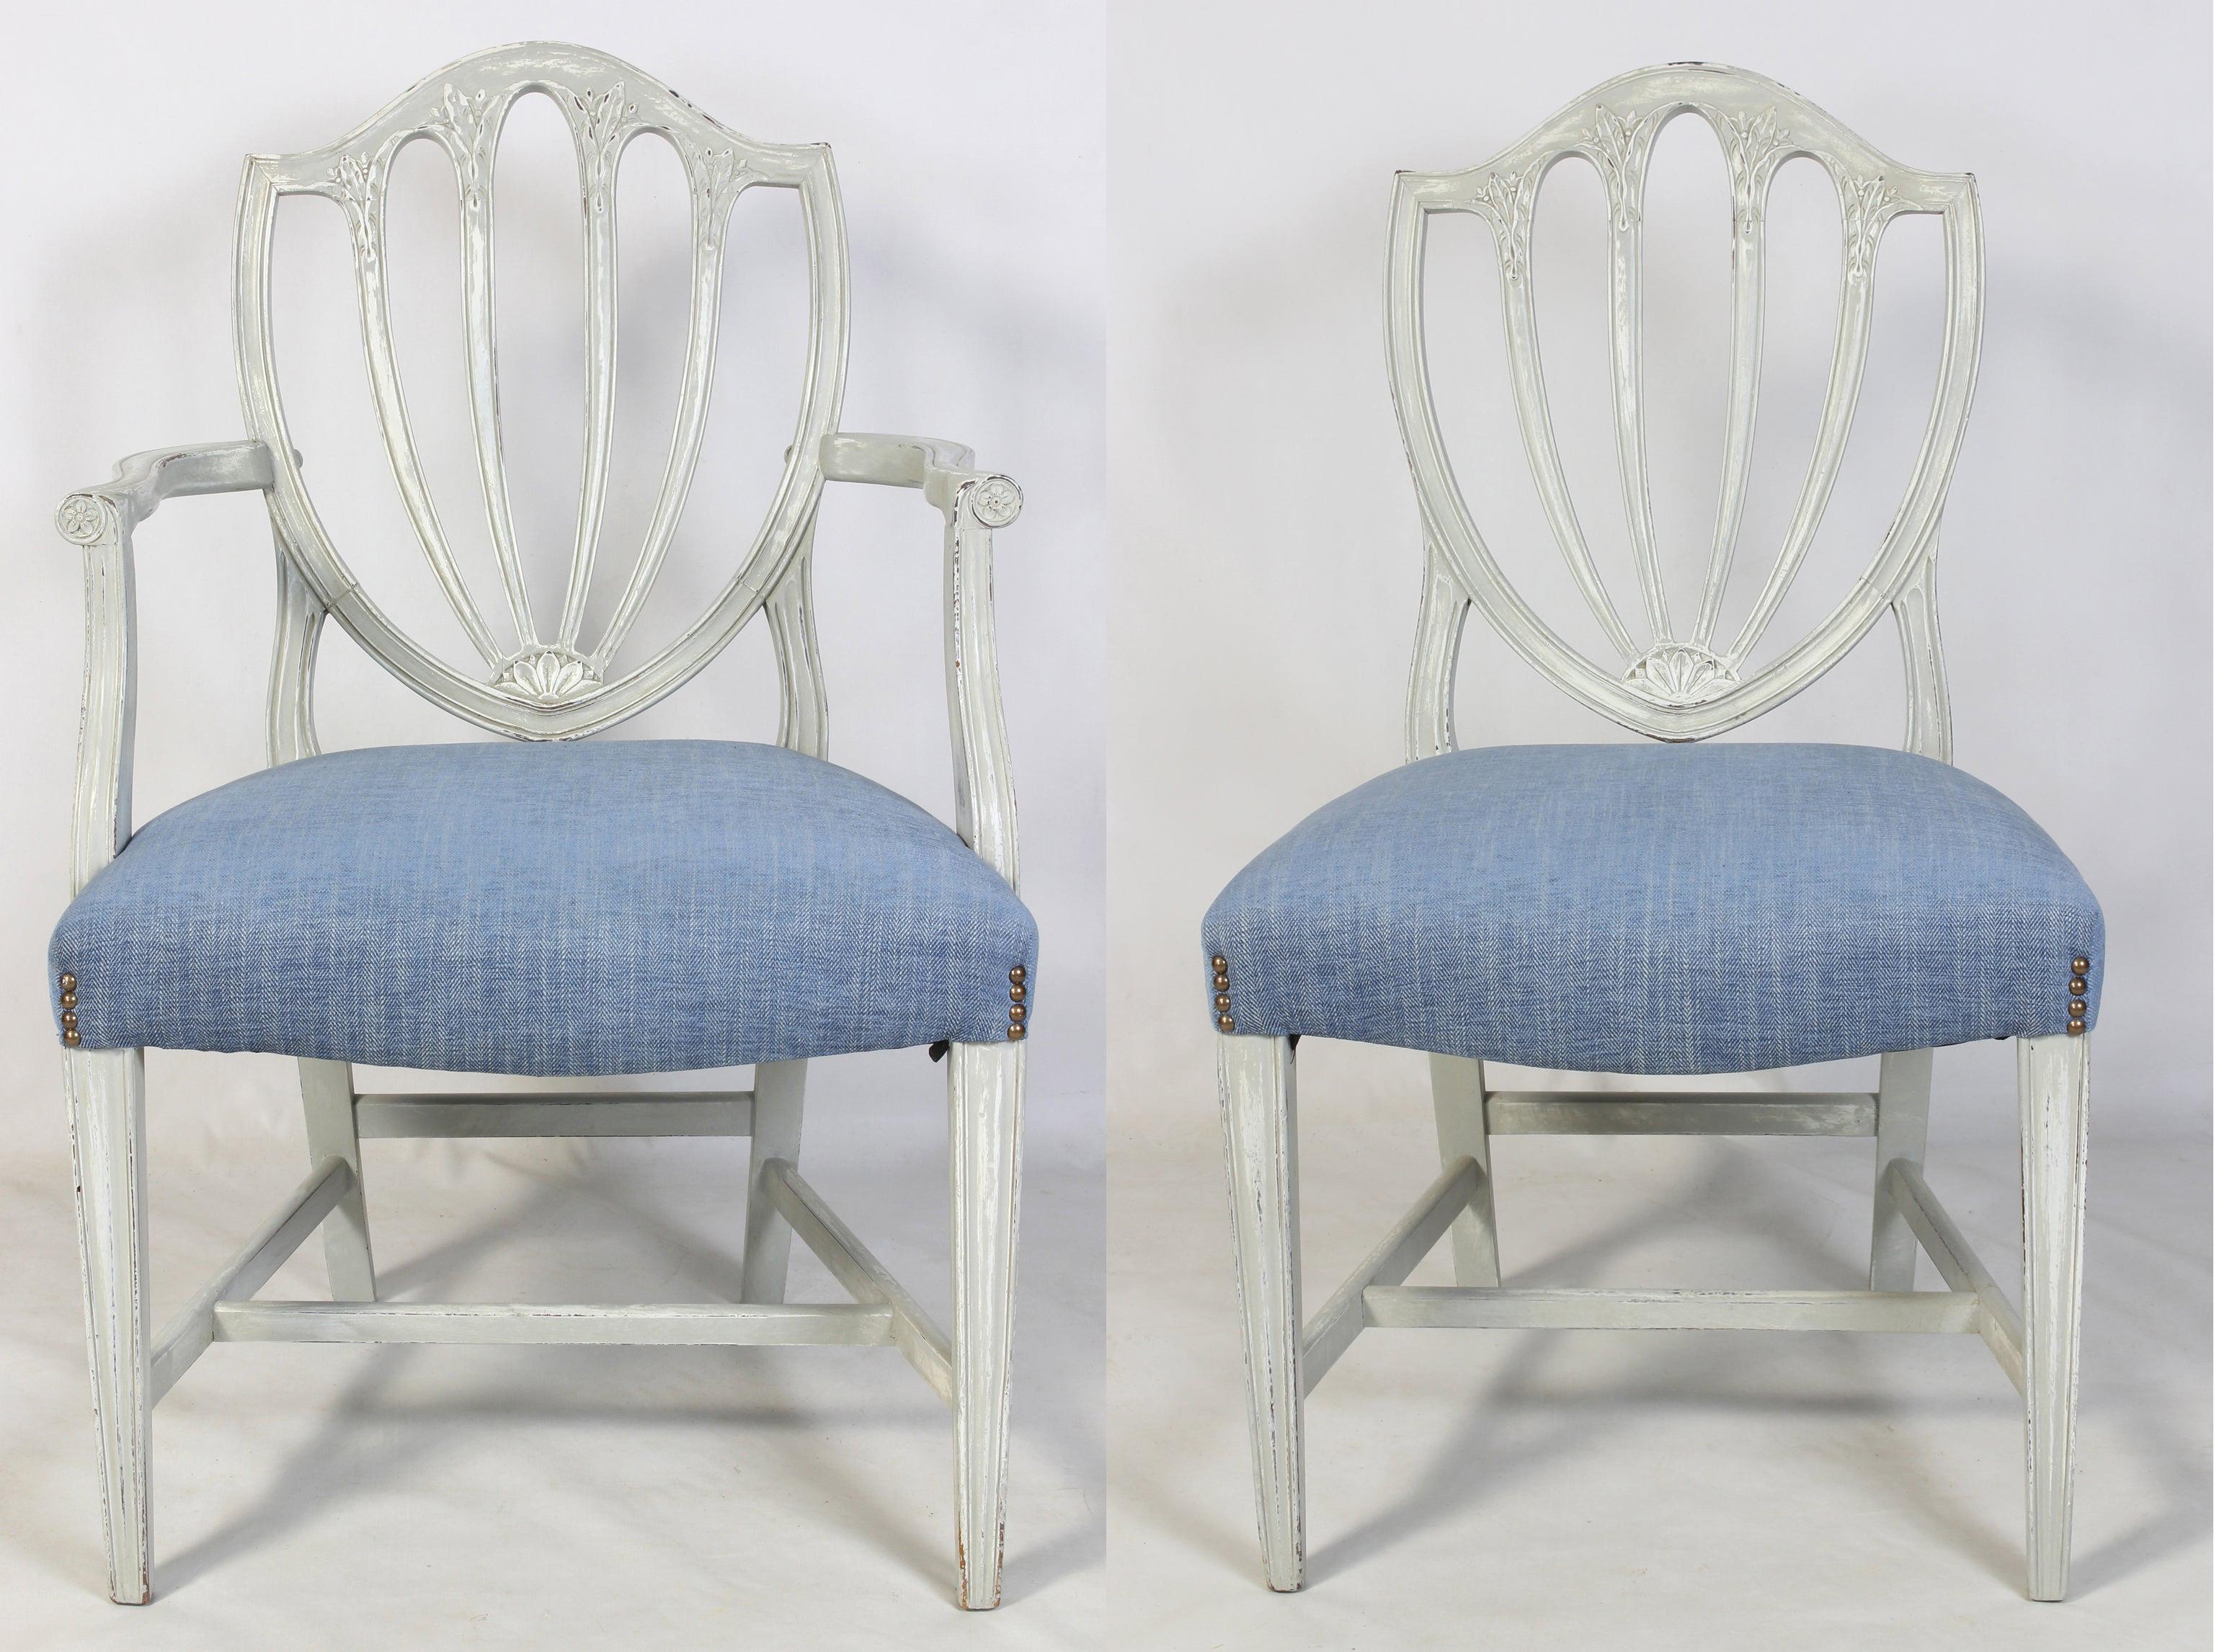 A set of eight solid mahogany Hepplewhite style shield back dining chairs comprising two arms and six sides beautifully painted in a soft French gray and newly upholstered in medium blue cotton/linen fabric accented with nail heads.